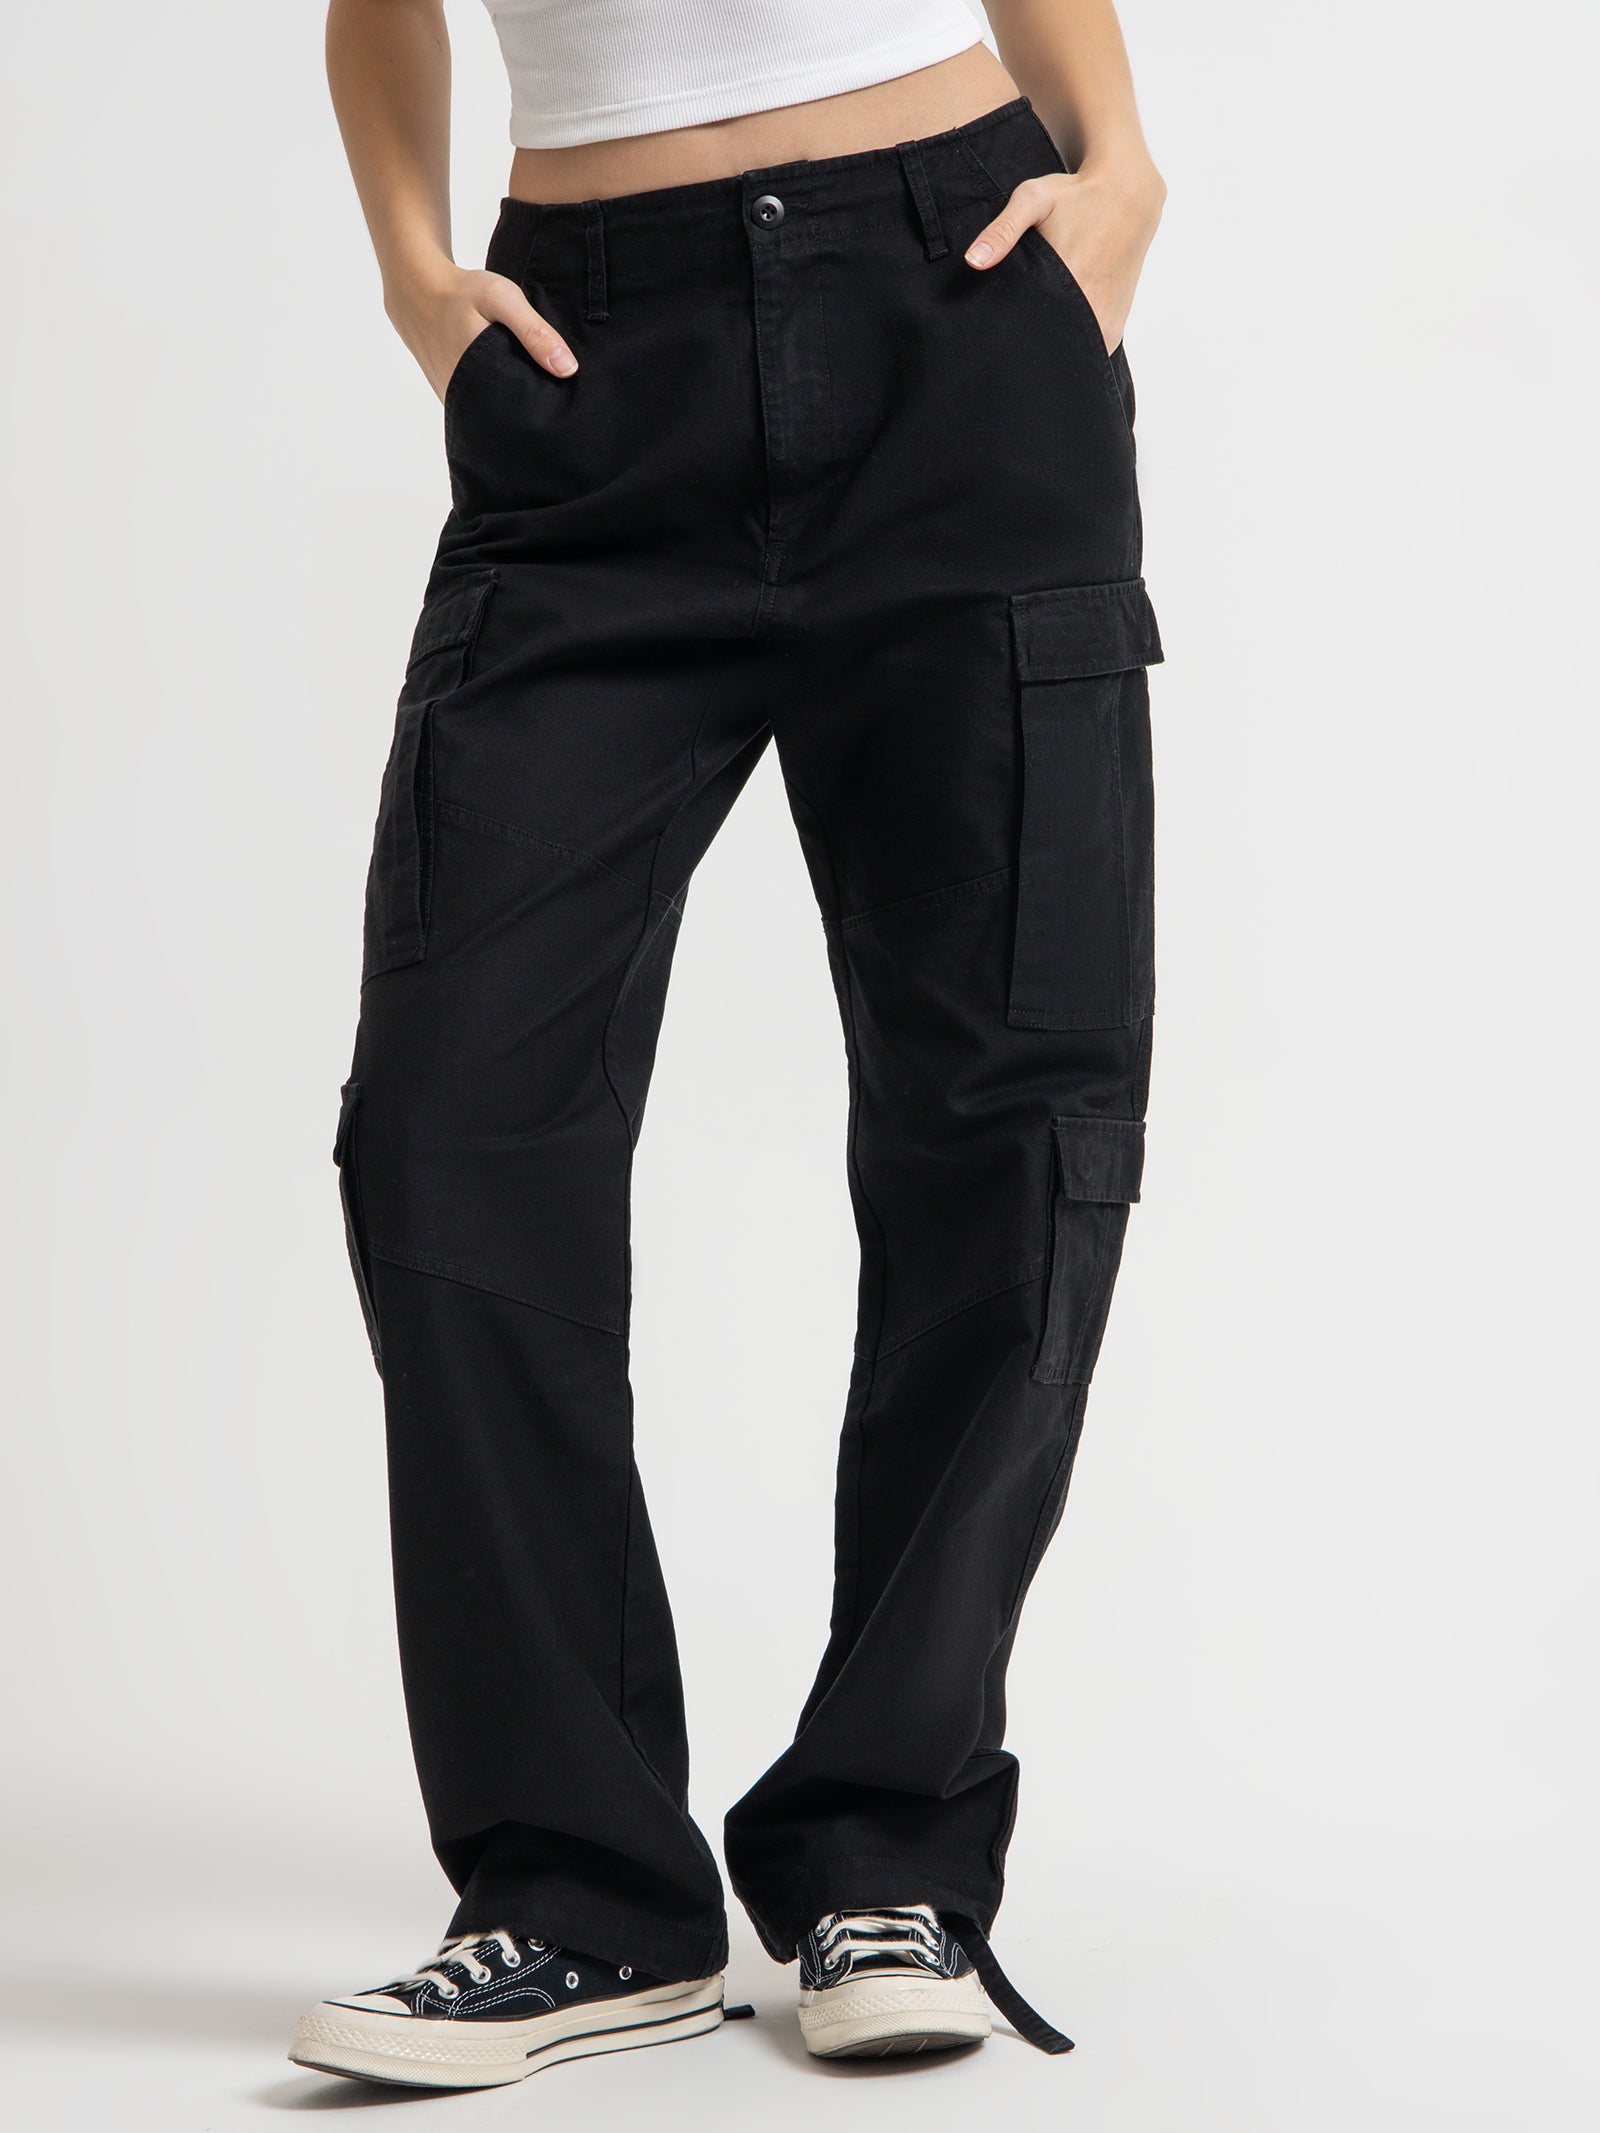 399 Black Cargo Pants Male Stock Photos - Free & Royalty-Free Stock Photos  from Dreamstime